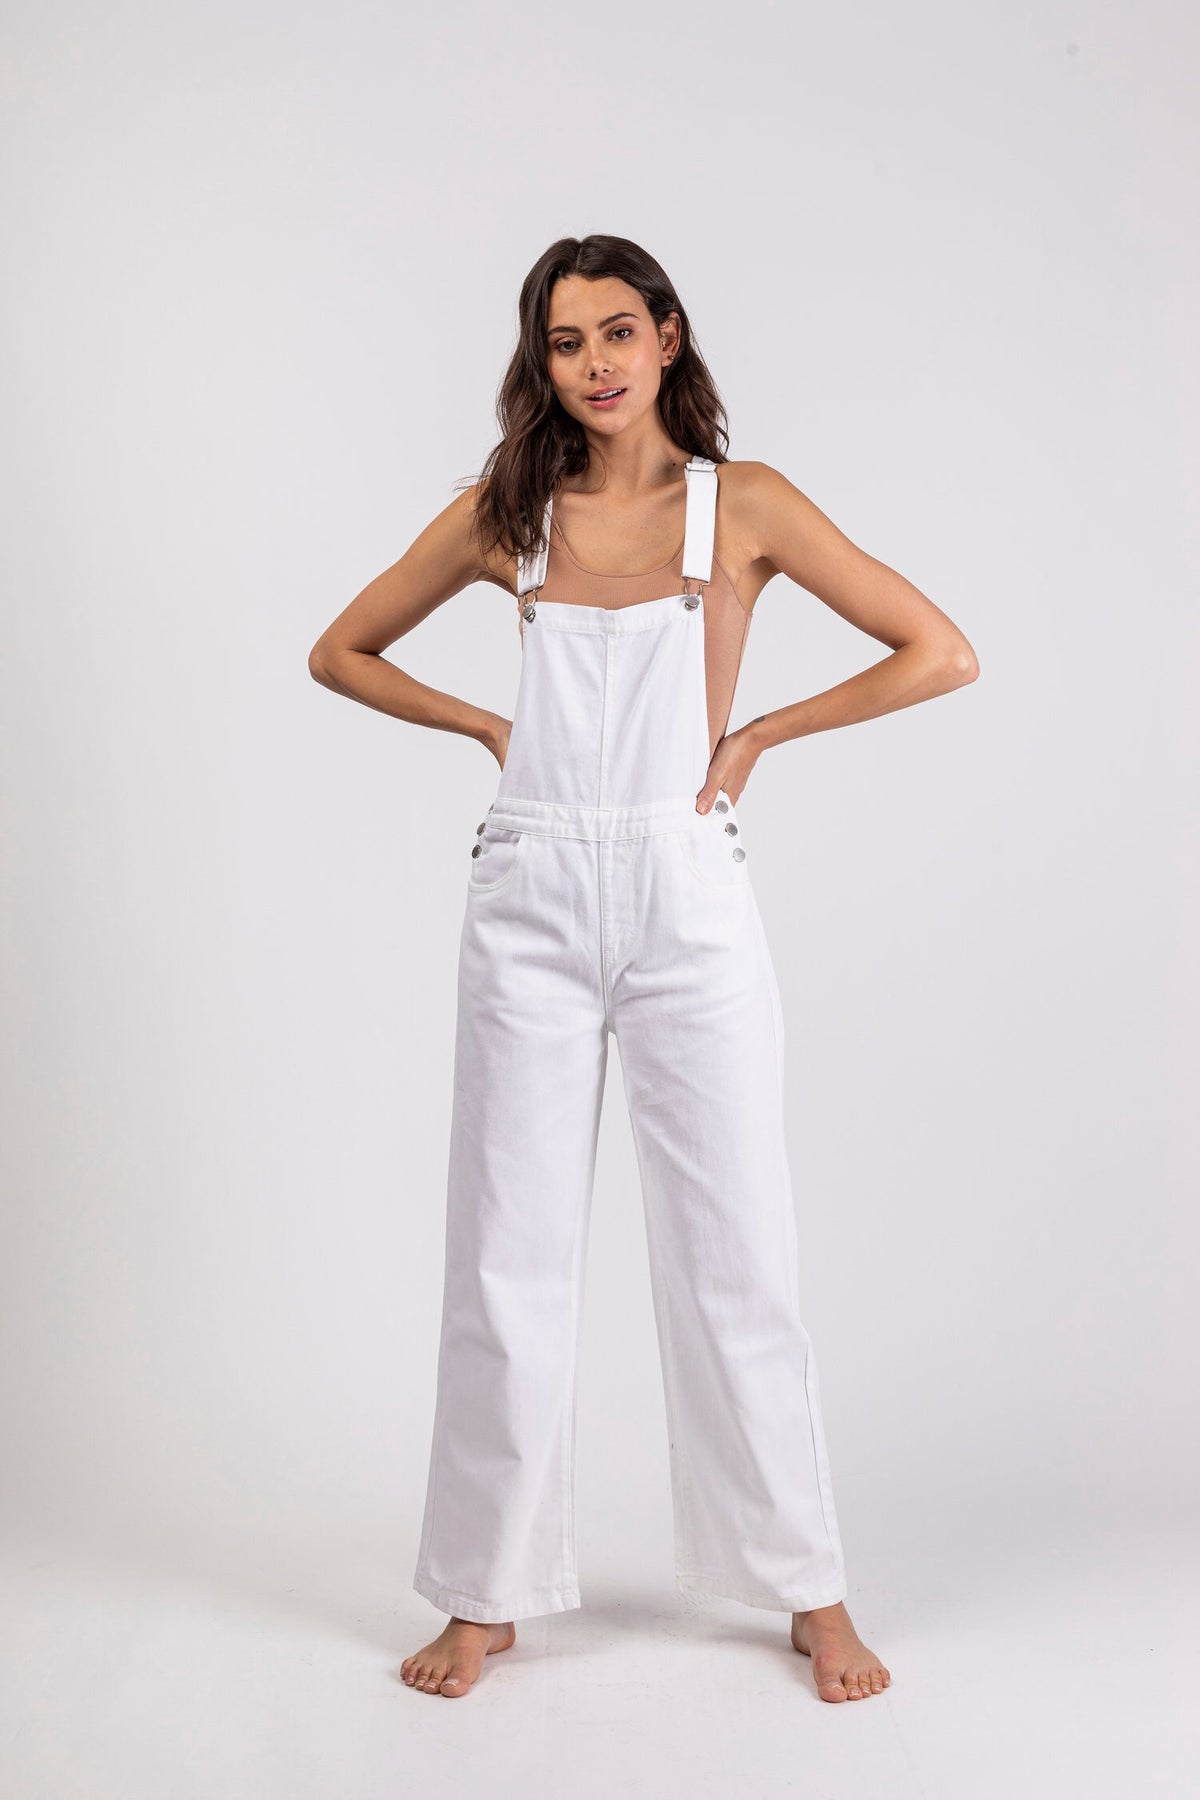 Grote jeans overalls - Mimi